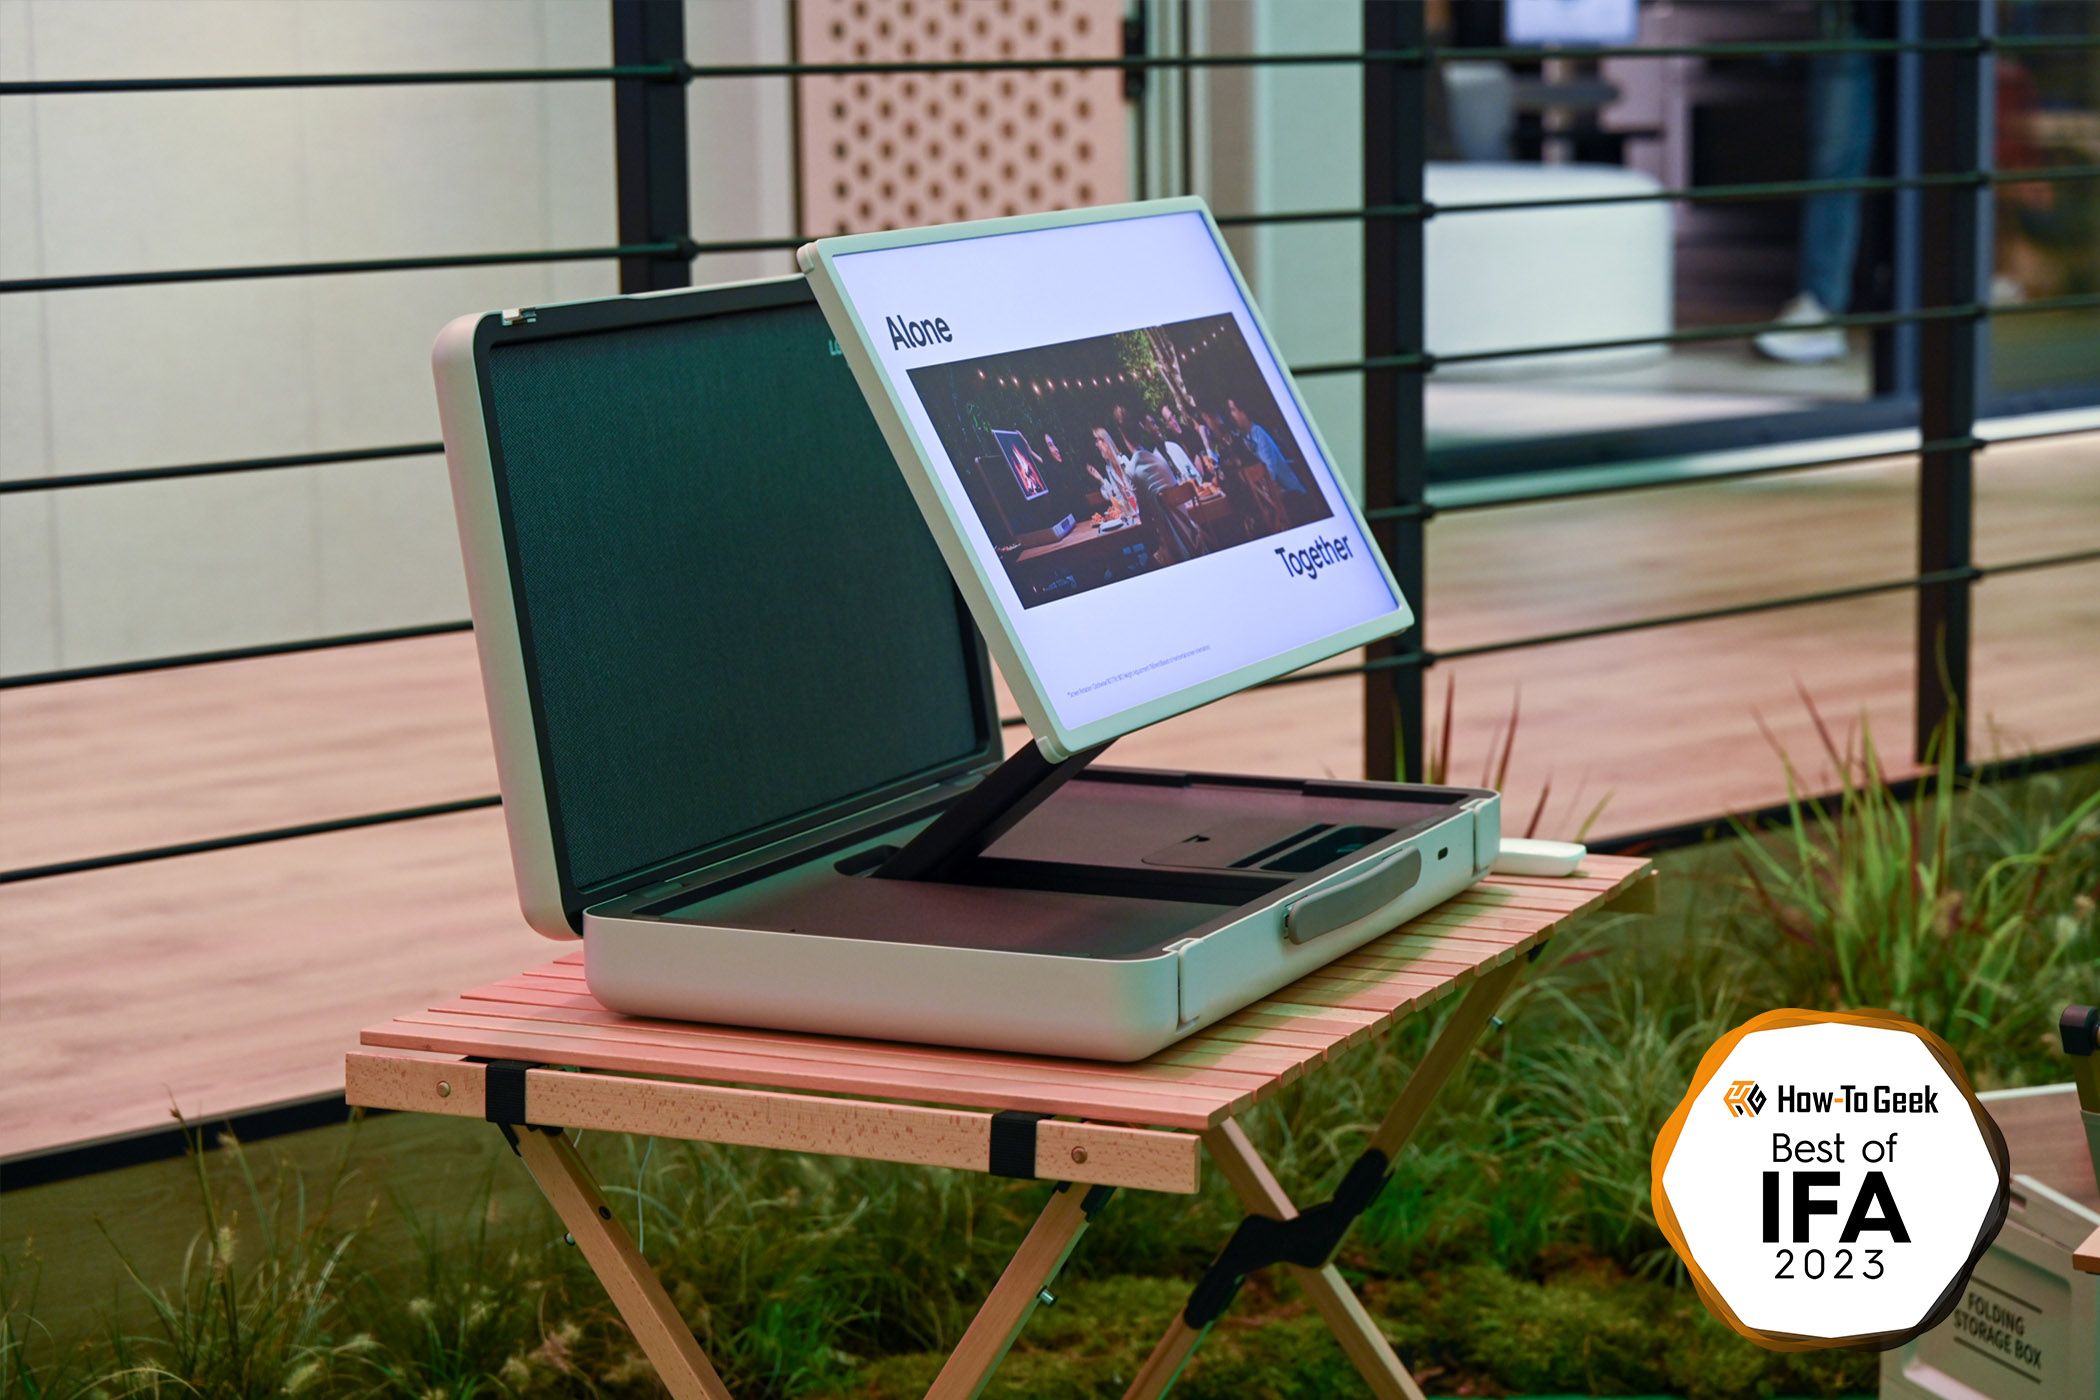 An LG TV folding out of a briefcase